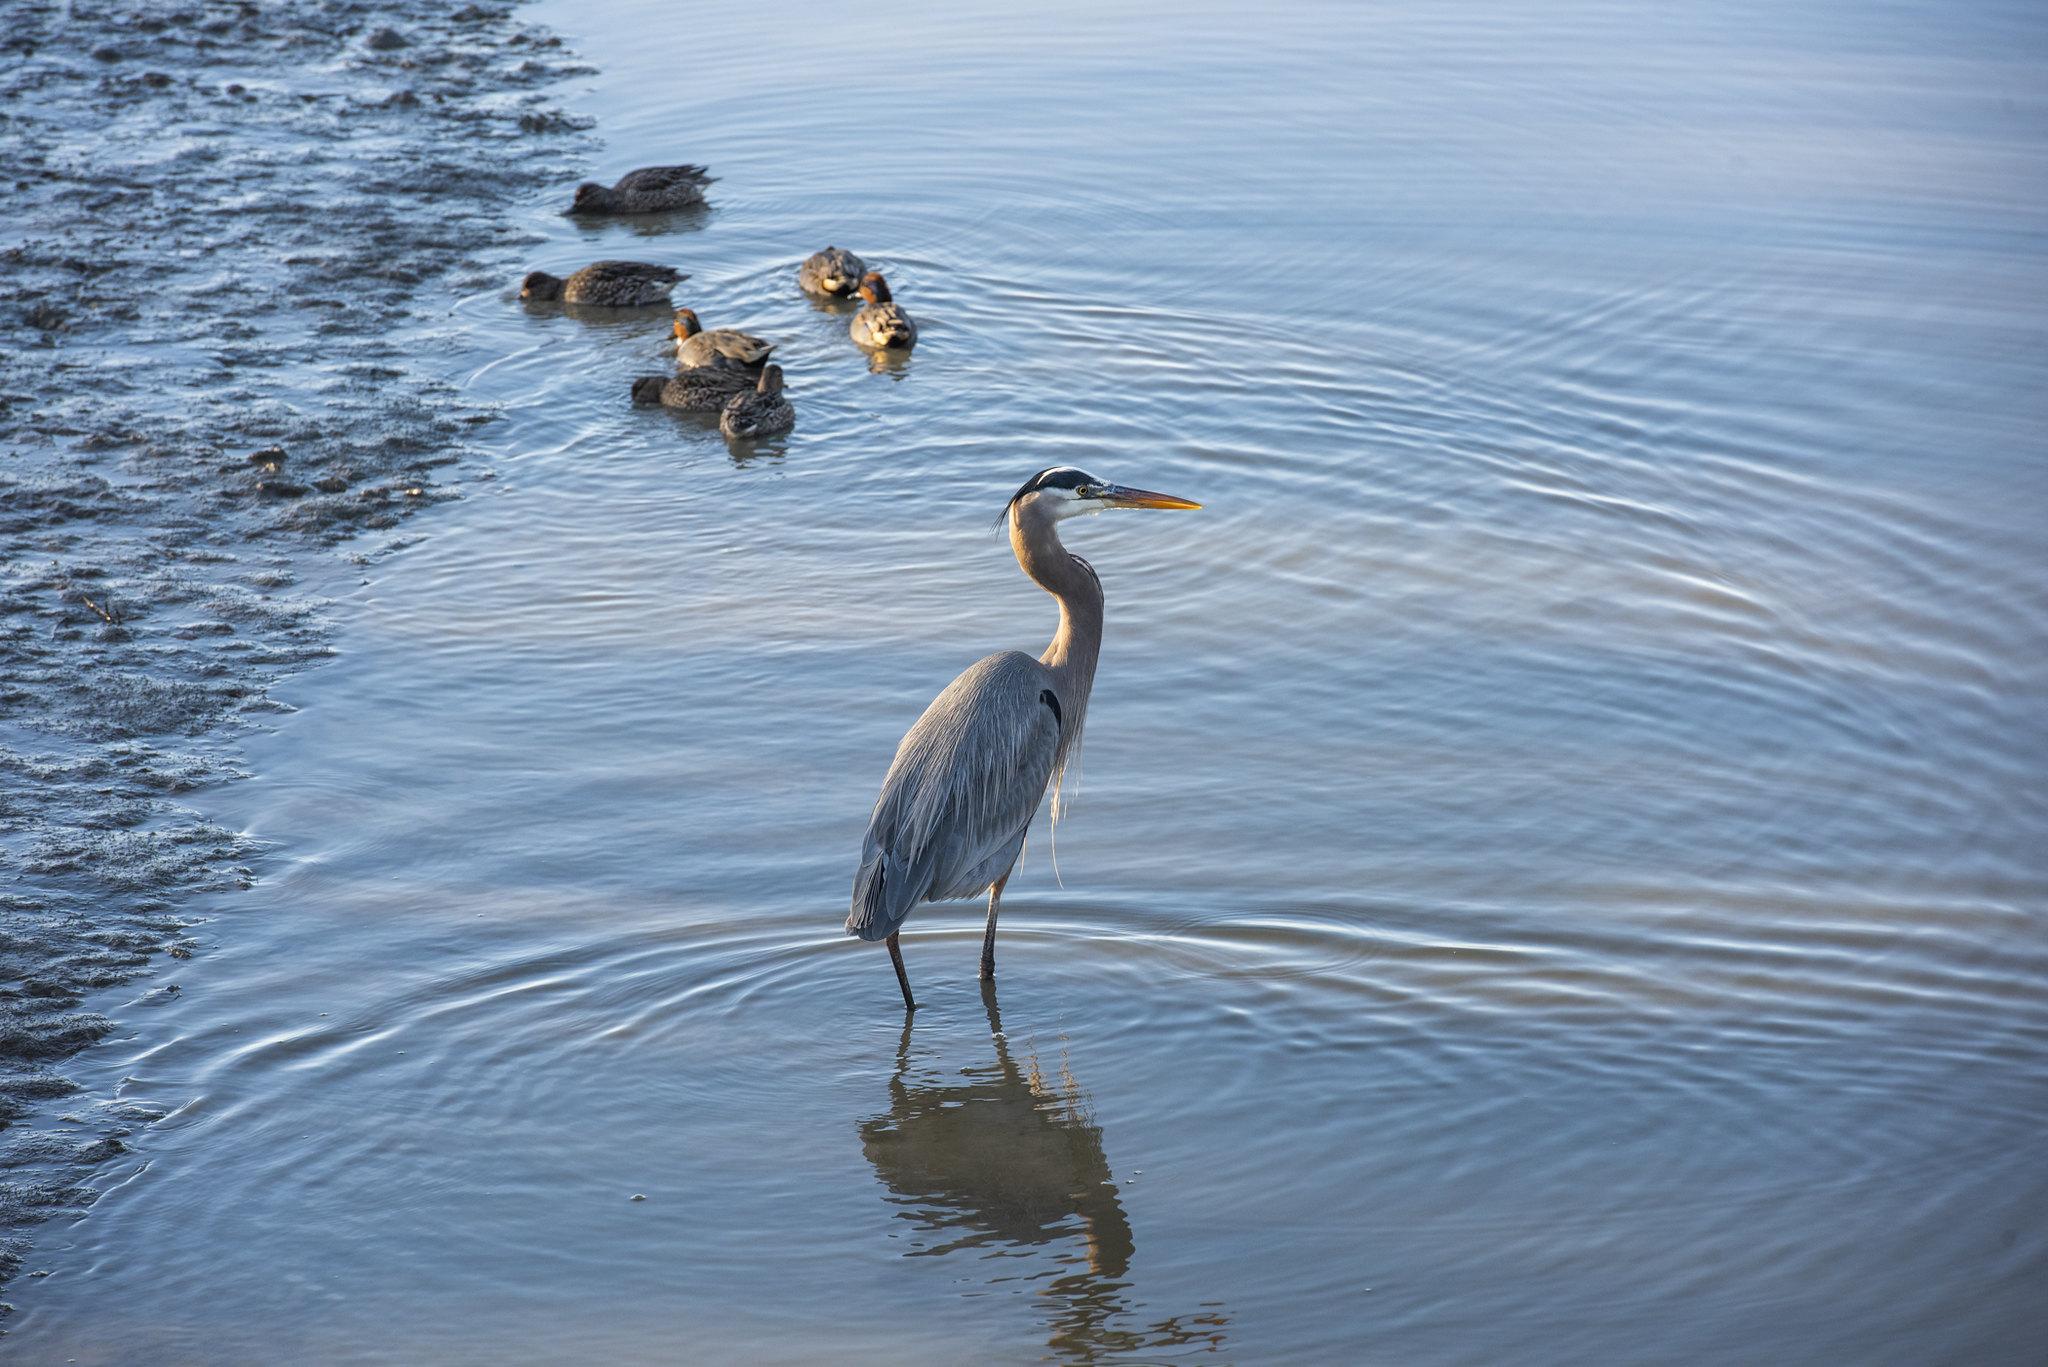 Photo shows an egret standing in waters of the Humboldt Bay, with 3-4 babies in the left background. 